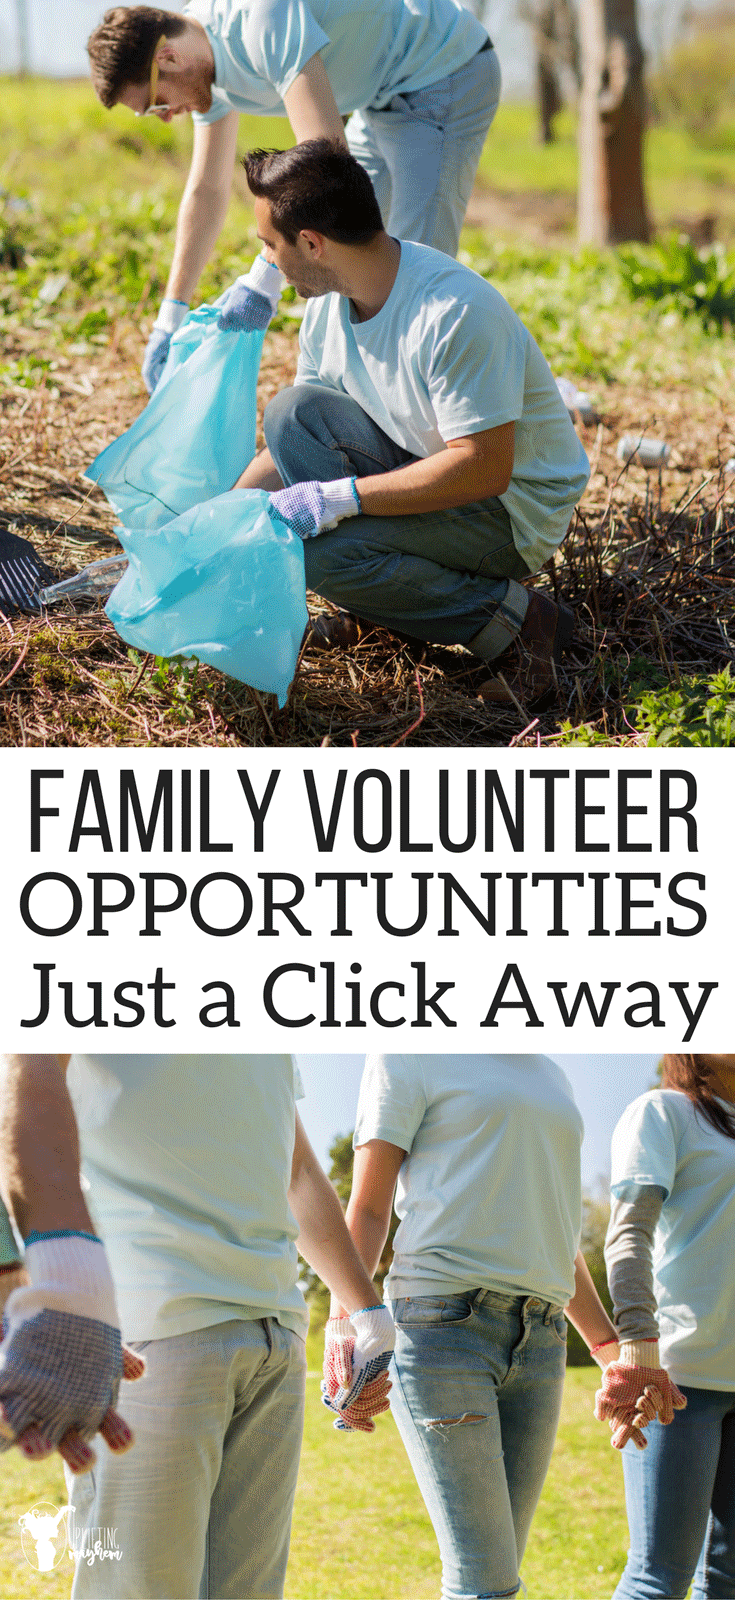 Family Volunteer Opportunities Just a Click Away